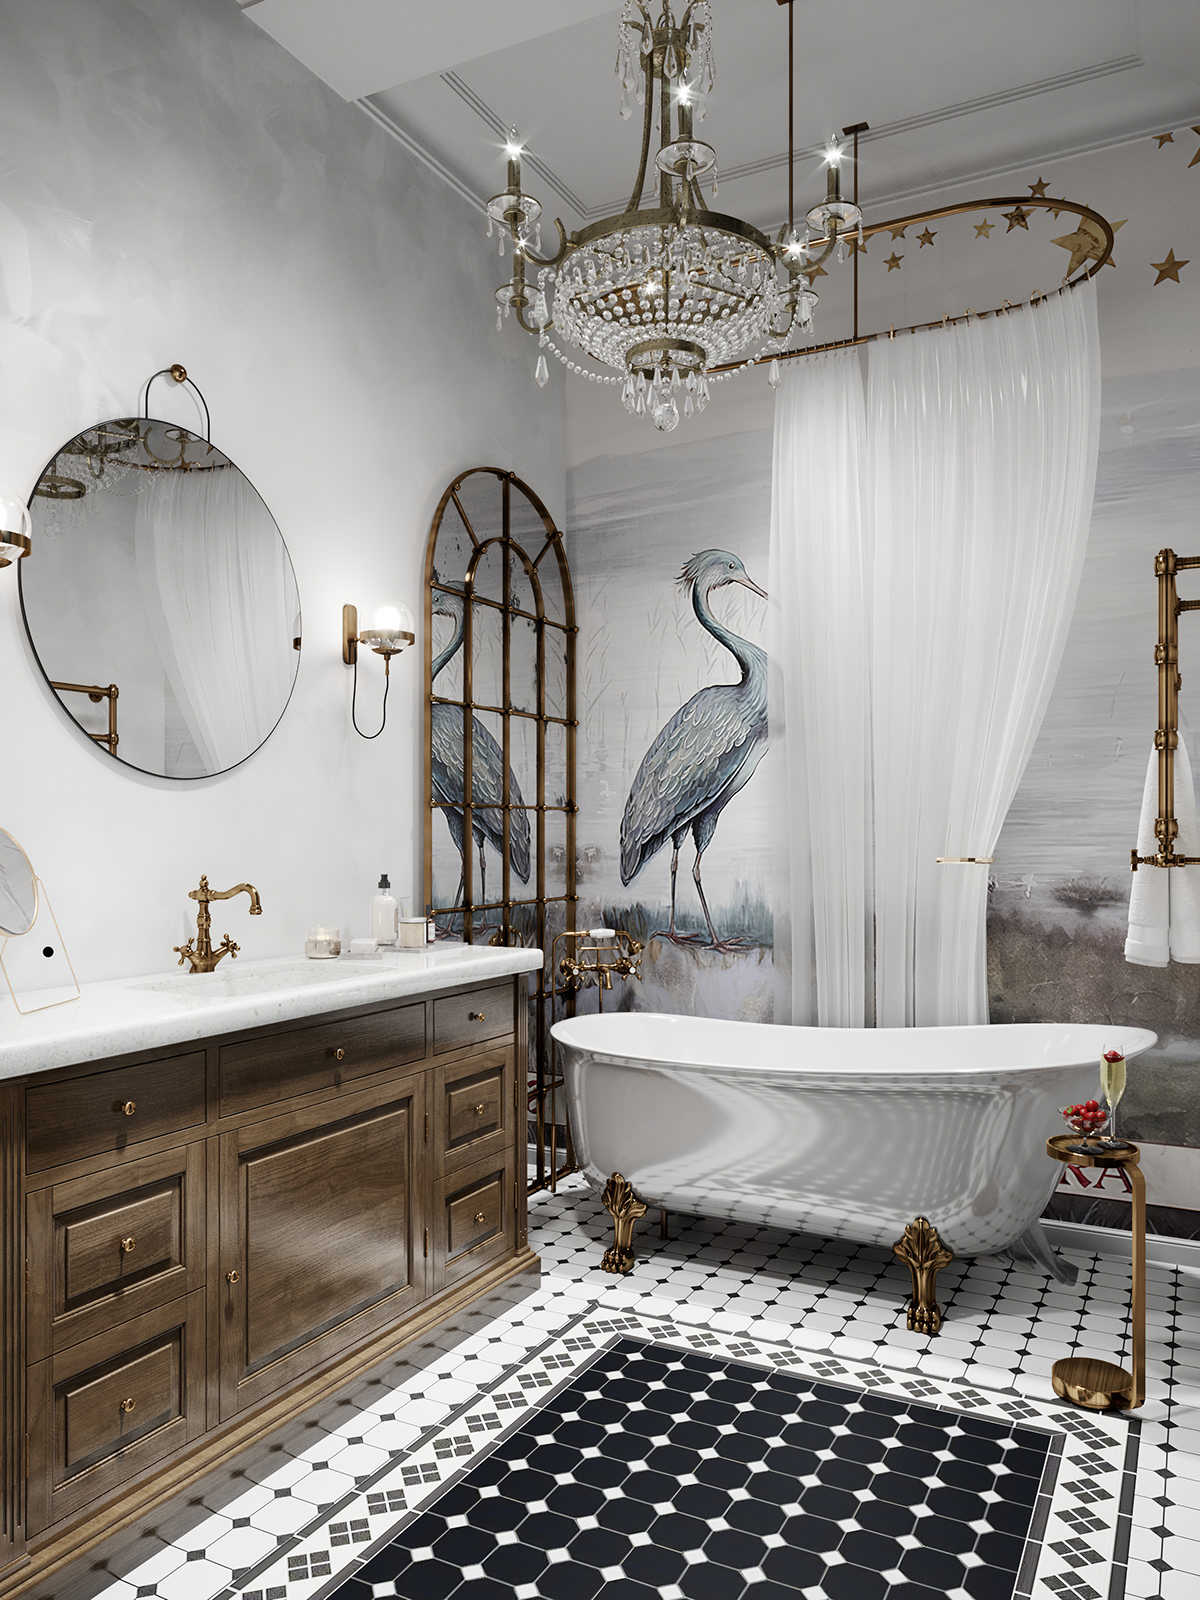 A pair of small wall sconces are mounted on either side of the mirror to create a unique look while amplifying the light in the room. In addition, the chandelier in the middle of the bathroom with sophisticated details brings a luxurious and elegant look.